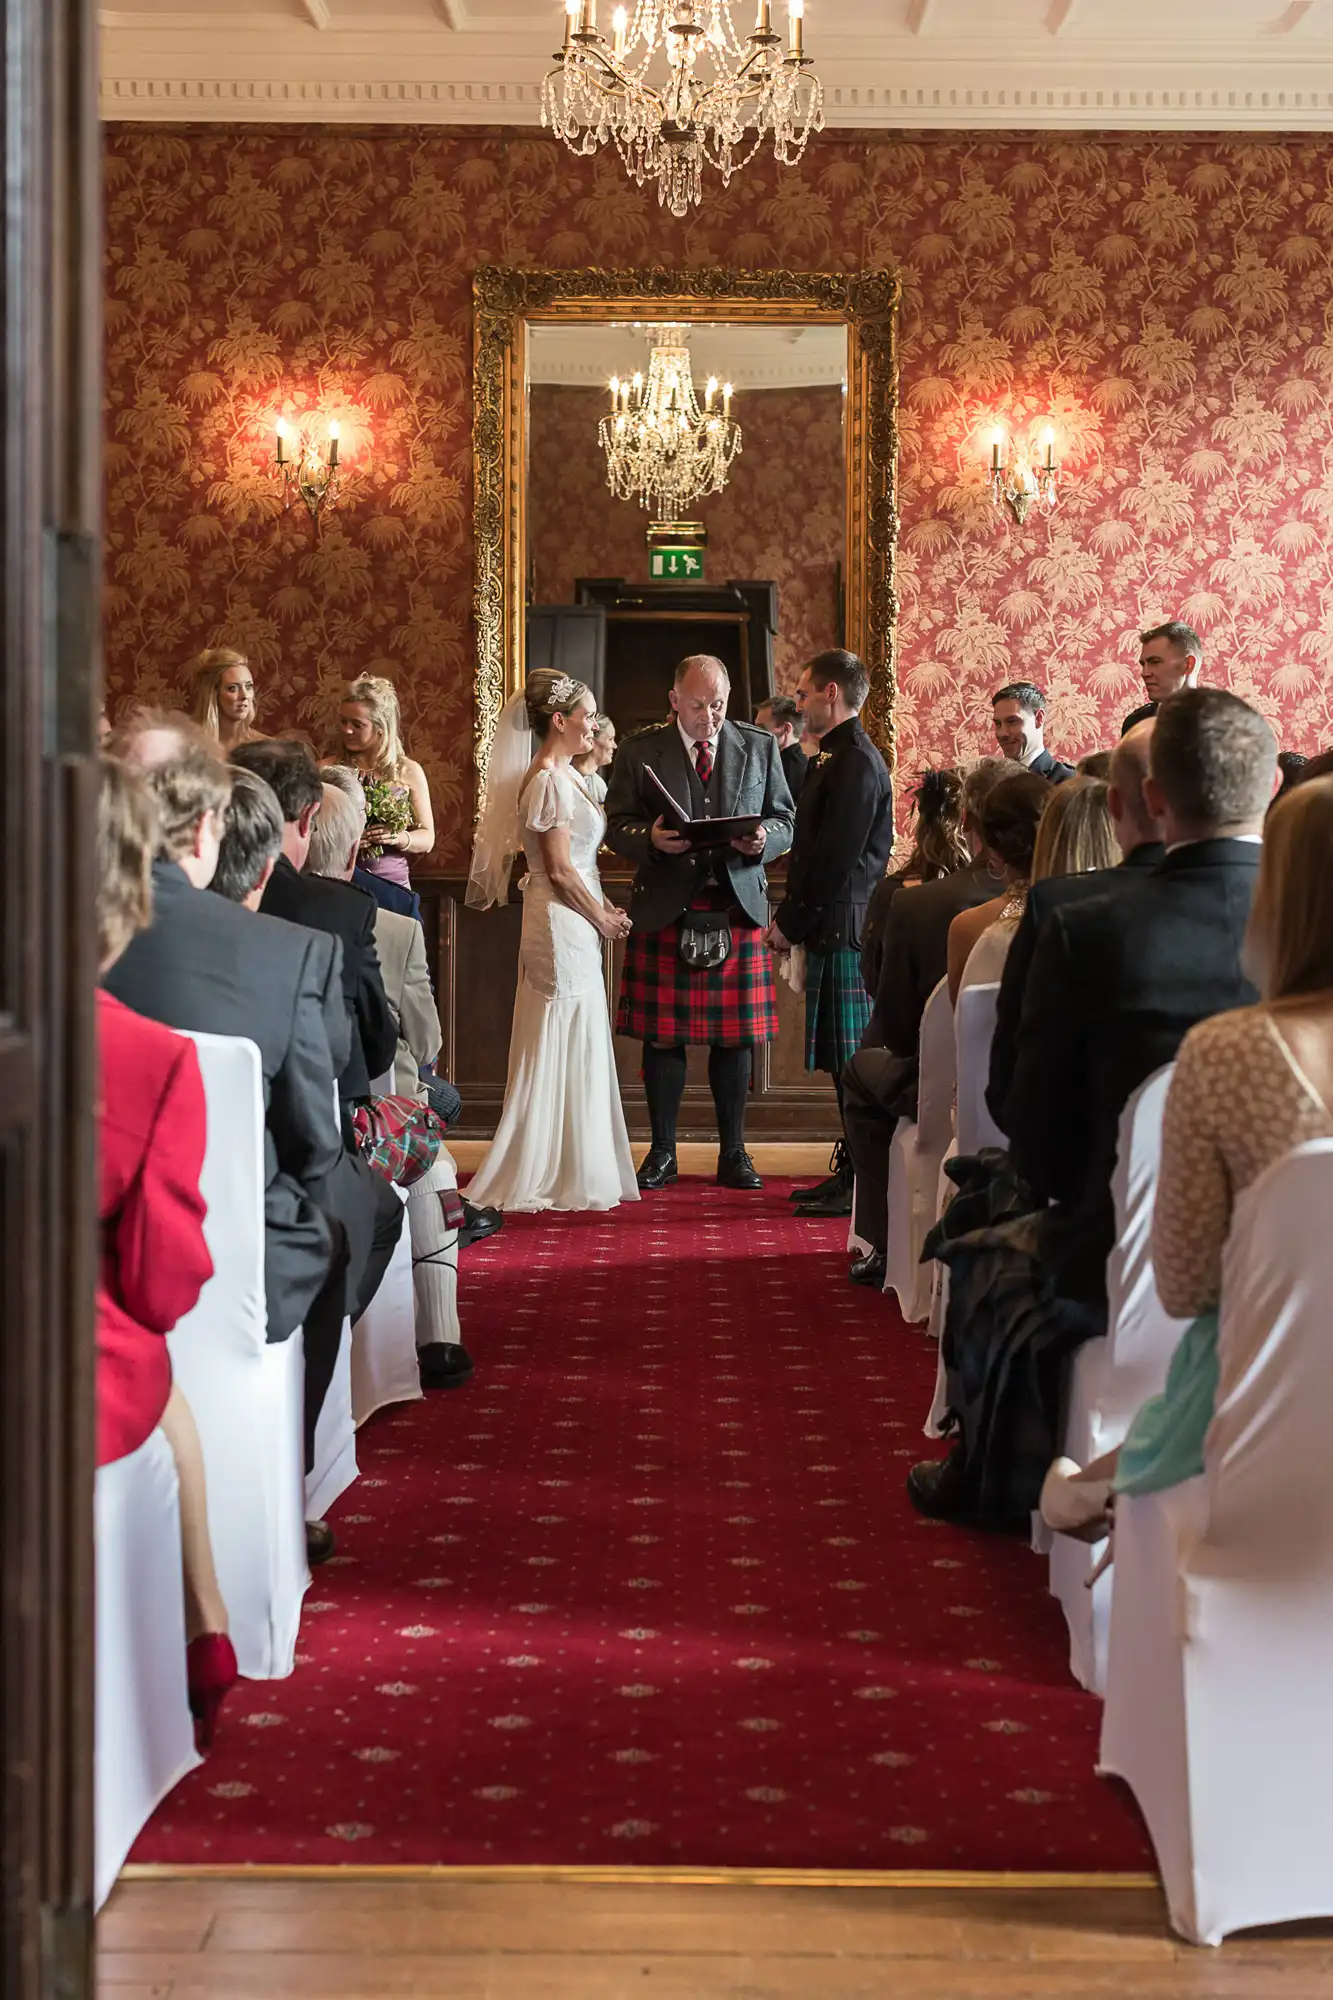 A wedding ceremony in a grand room with red patterned wallpaper, featuring a couple at the altar with a man in a kilt officiating and guests seated along the aisle.